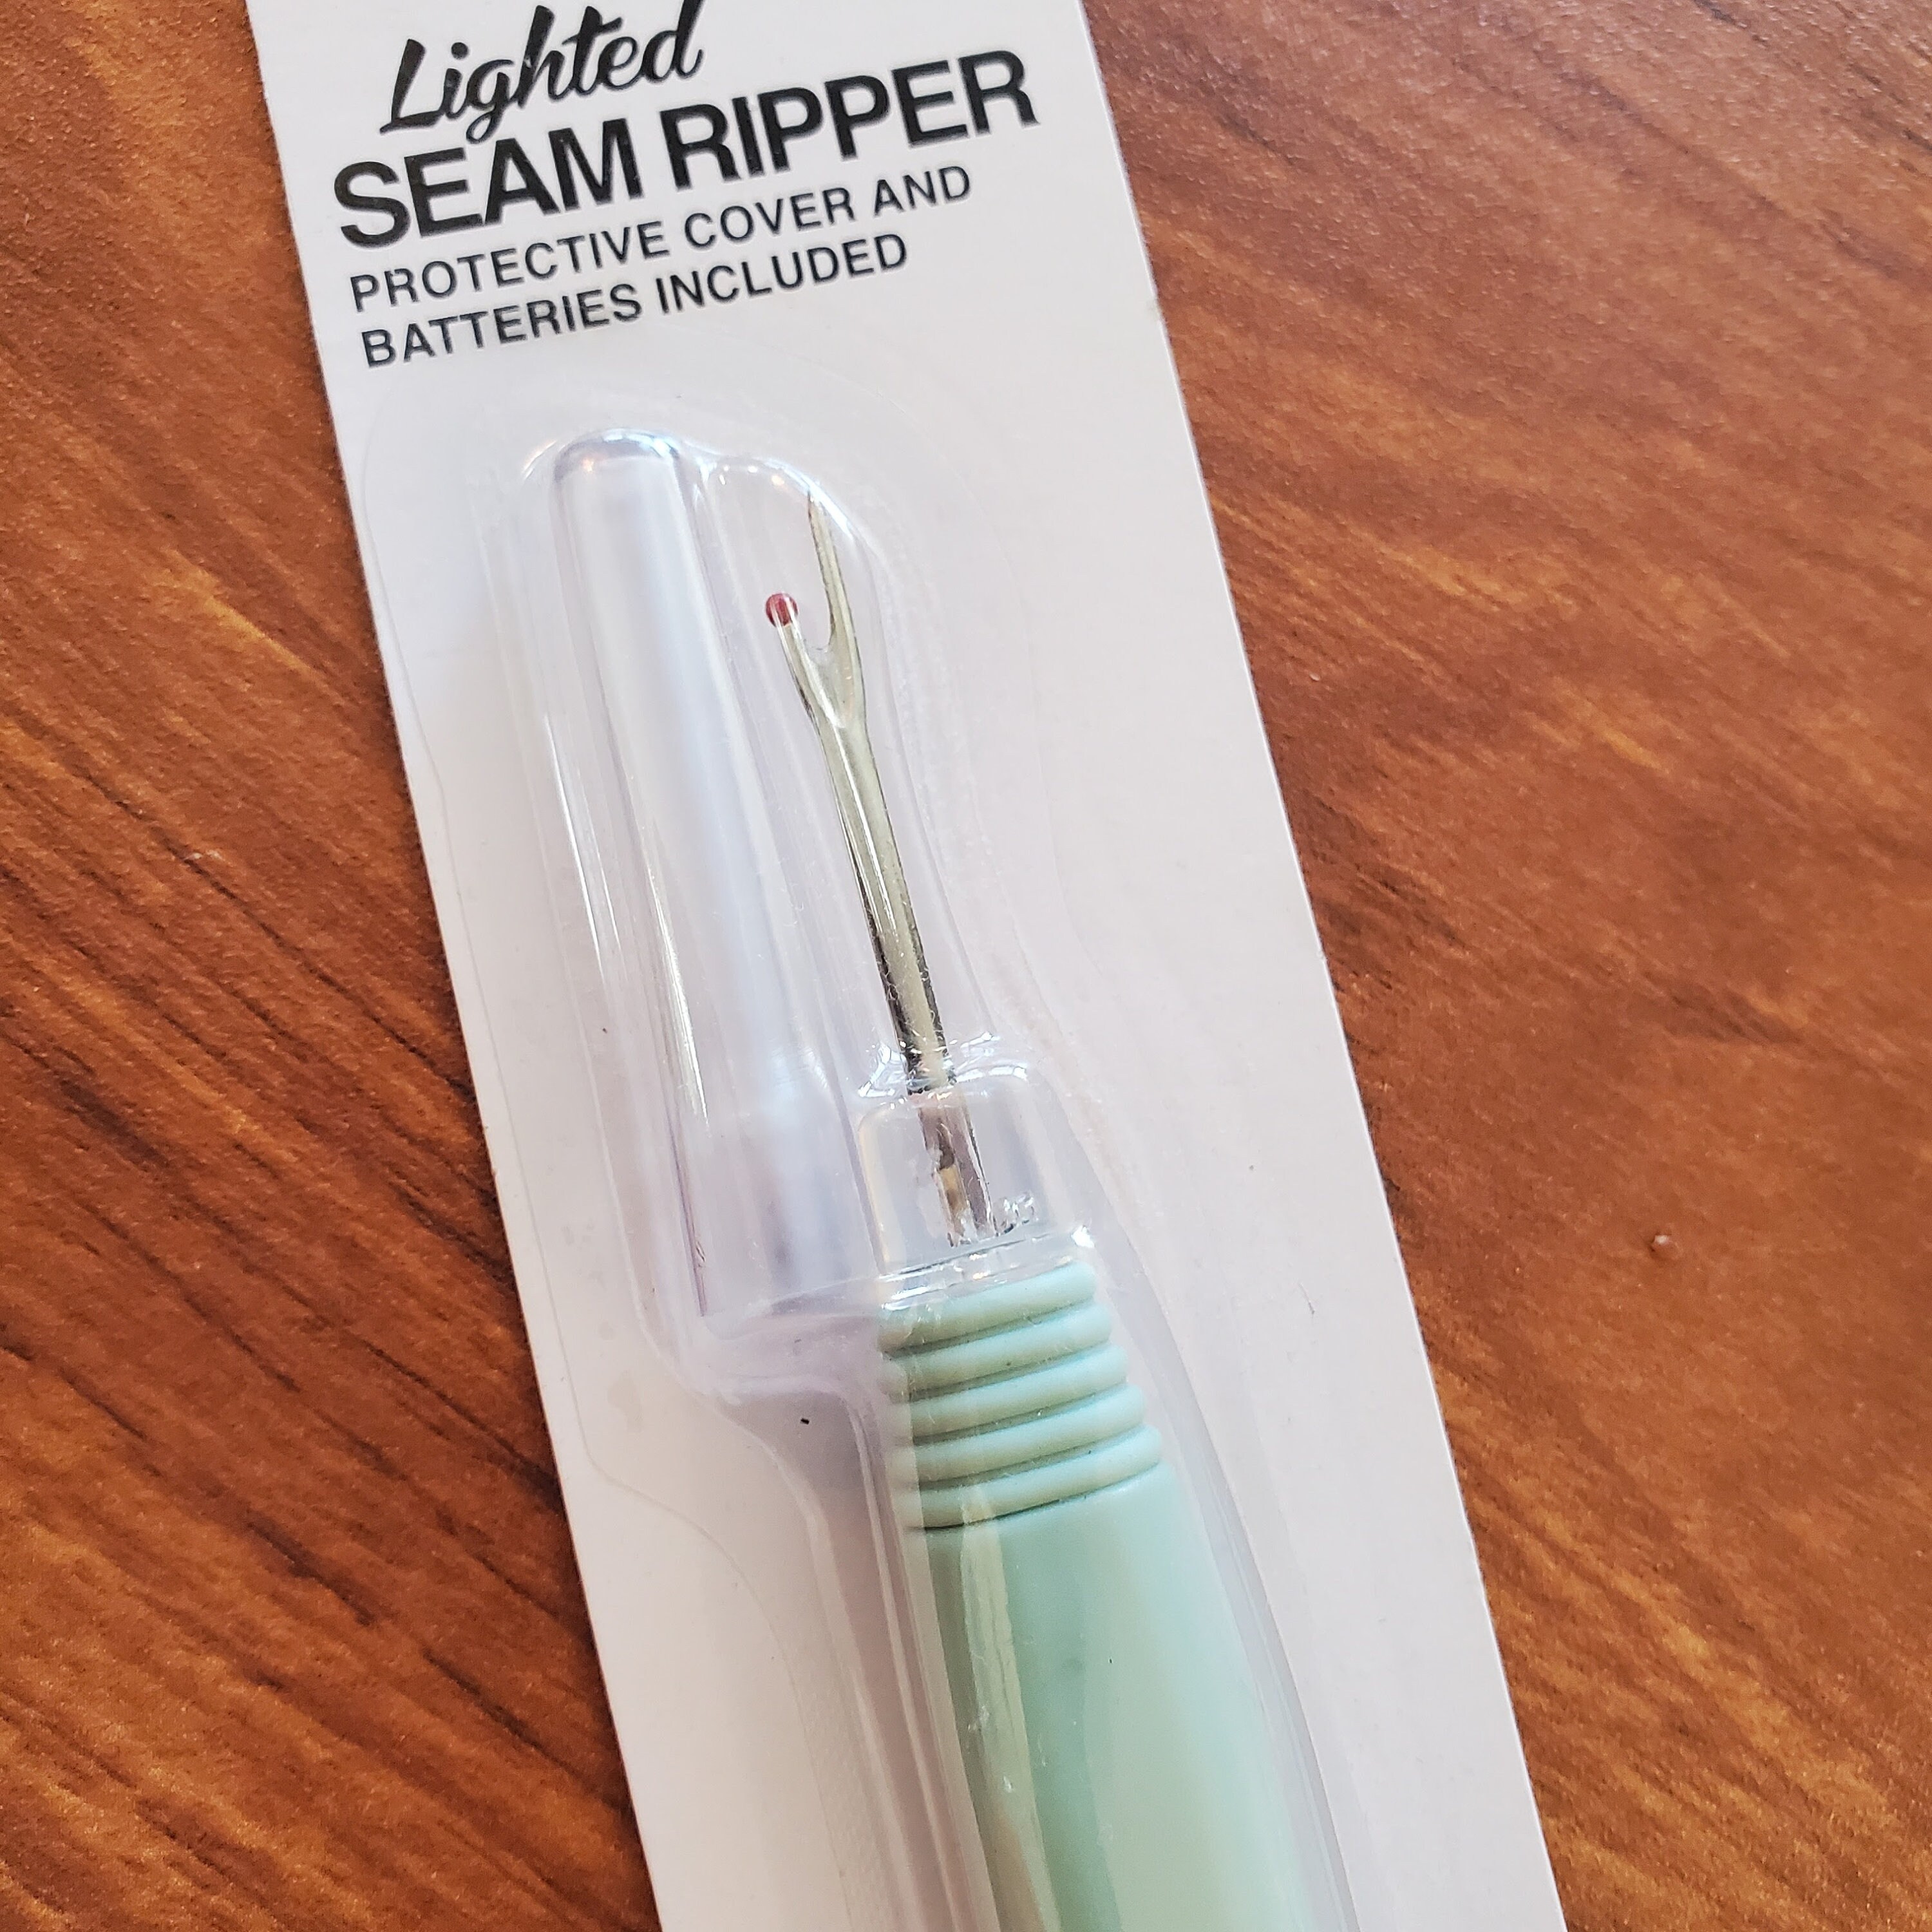 Dritz Lighted Seam Ripper and Needle Threader. Dual Sewing Notion Tool.  Batteries Not Included. 